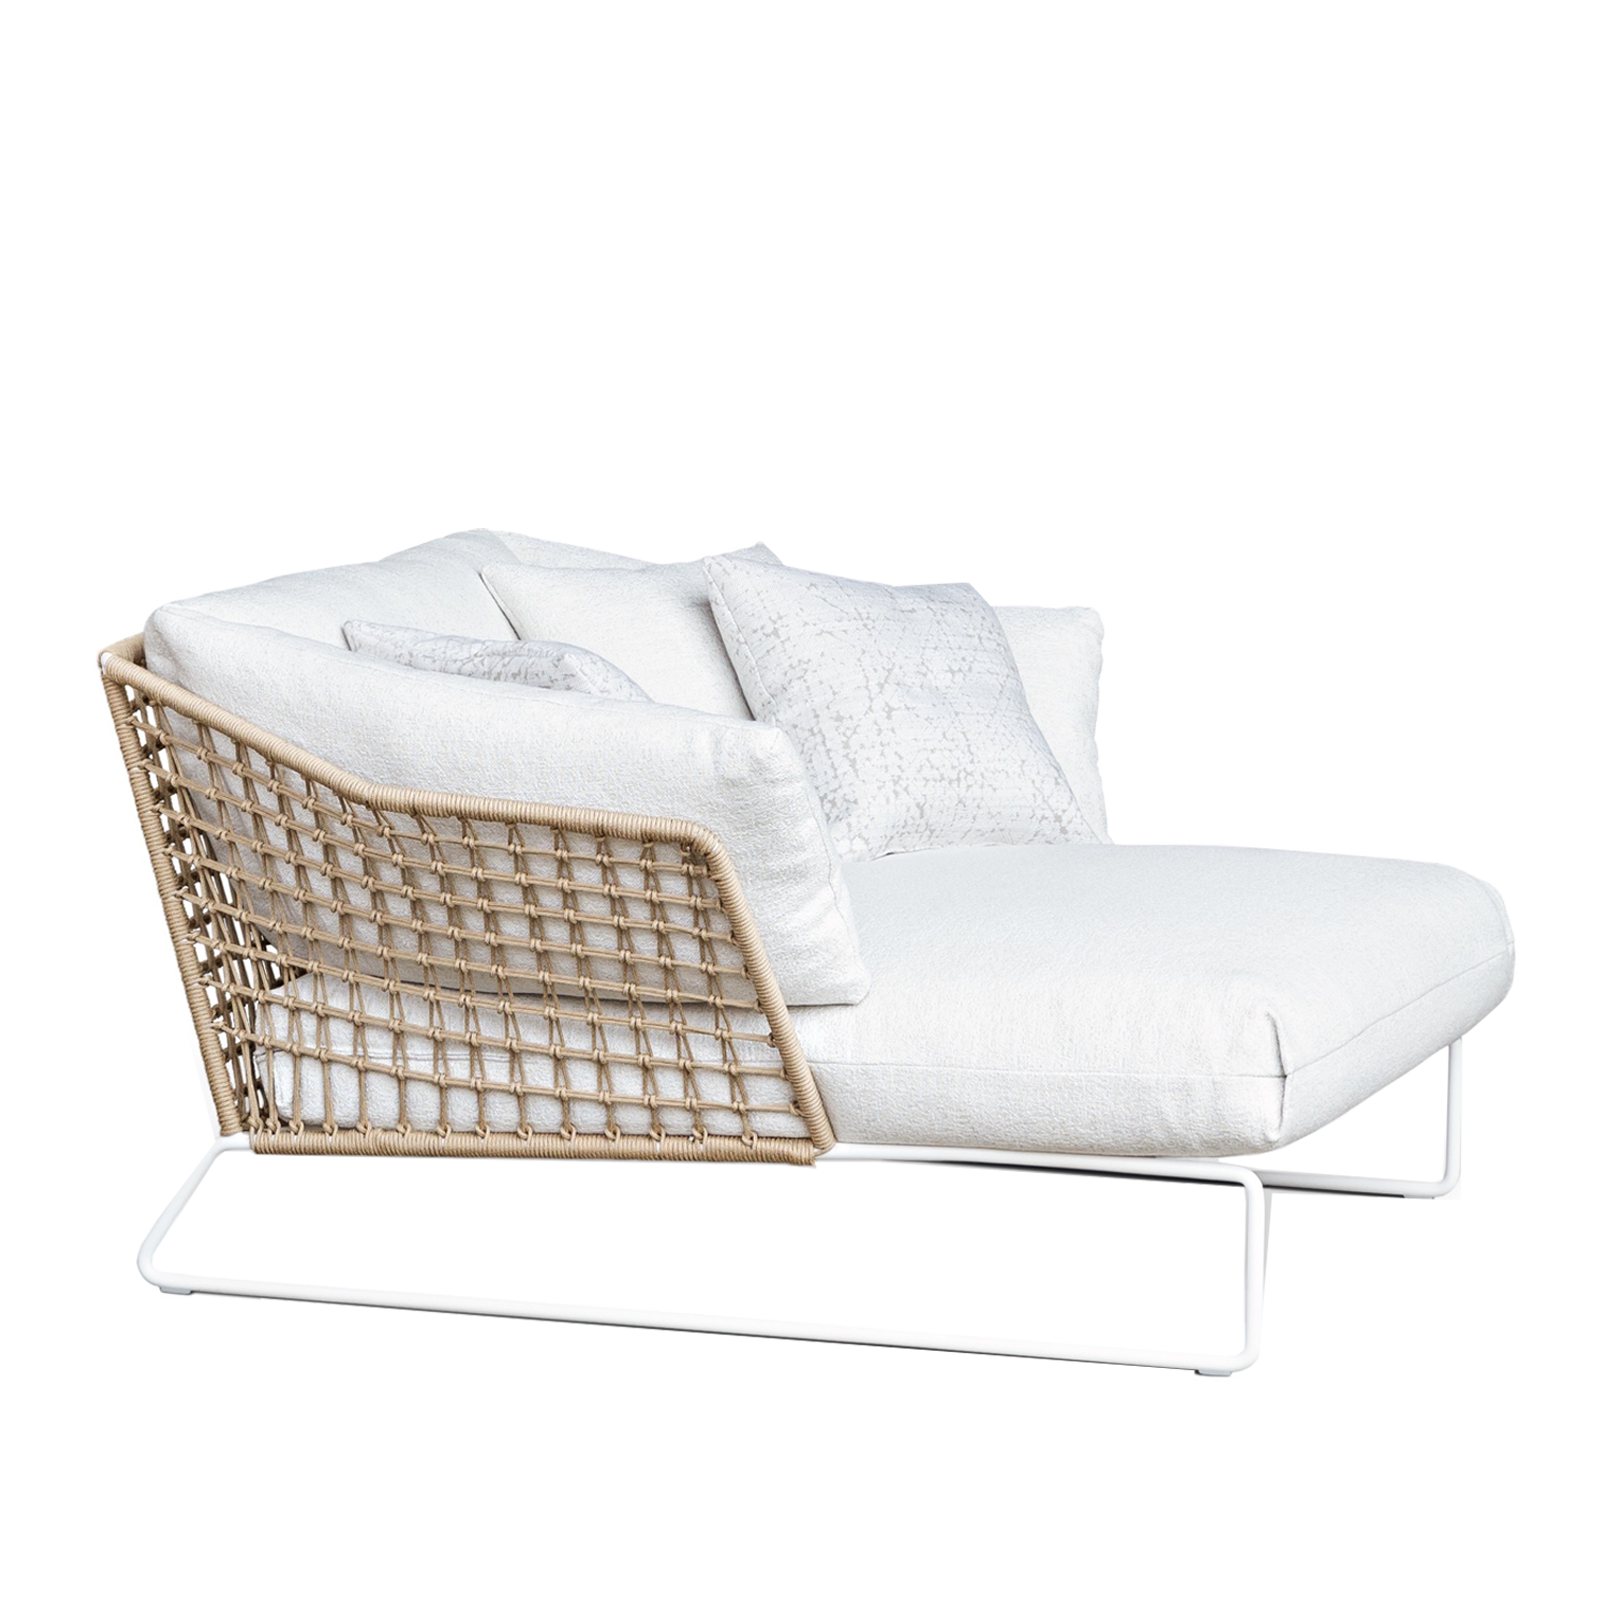 New York Soleil | Outdoor Sofa/Chaise